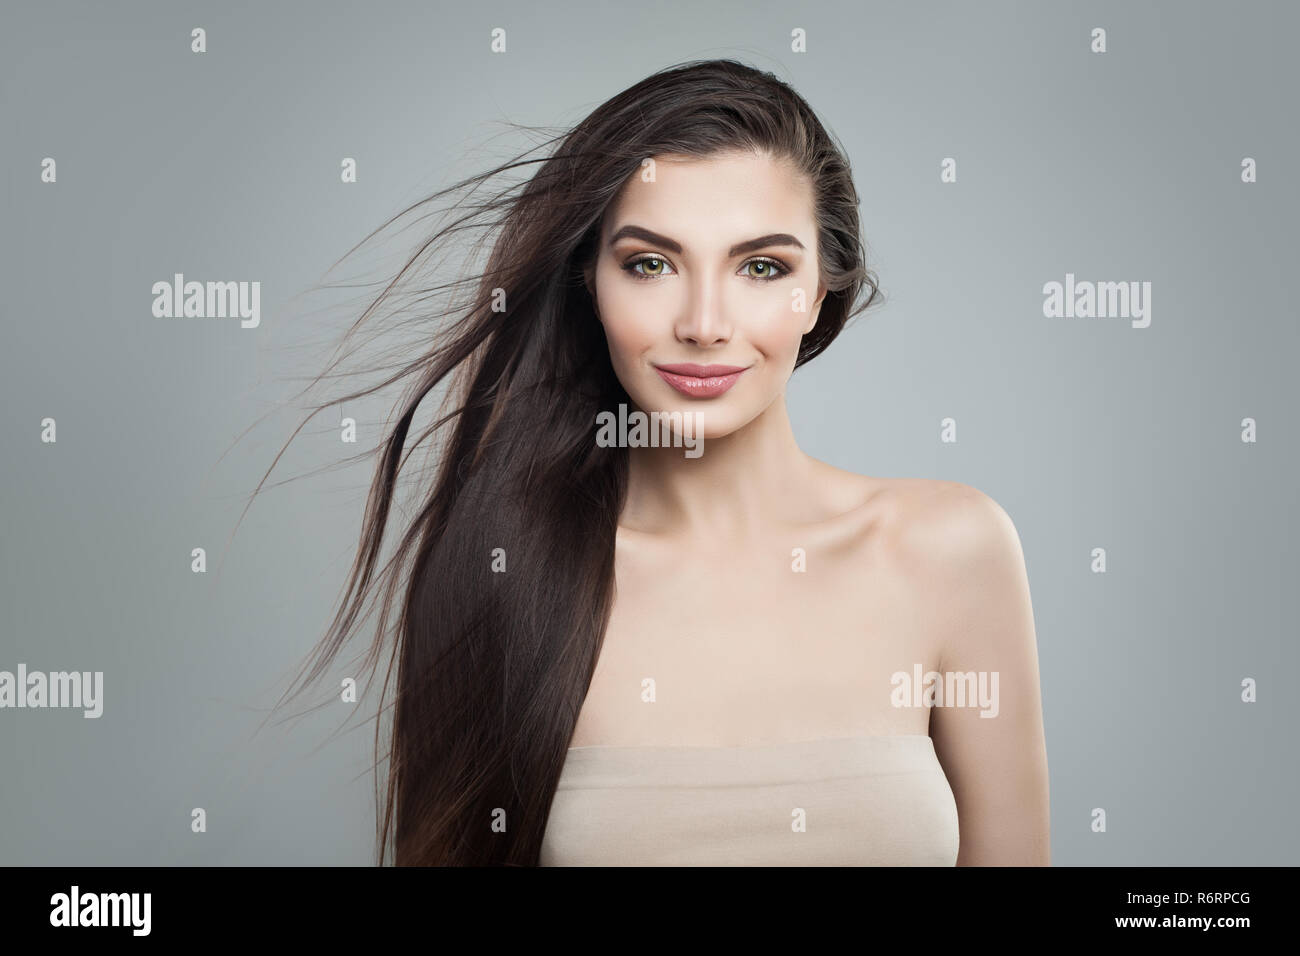 Young Woman Fashion Model With Long Dark Hairstyle Makeup